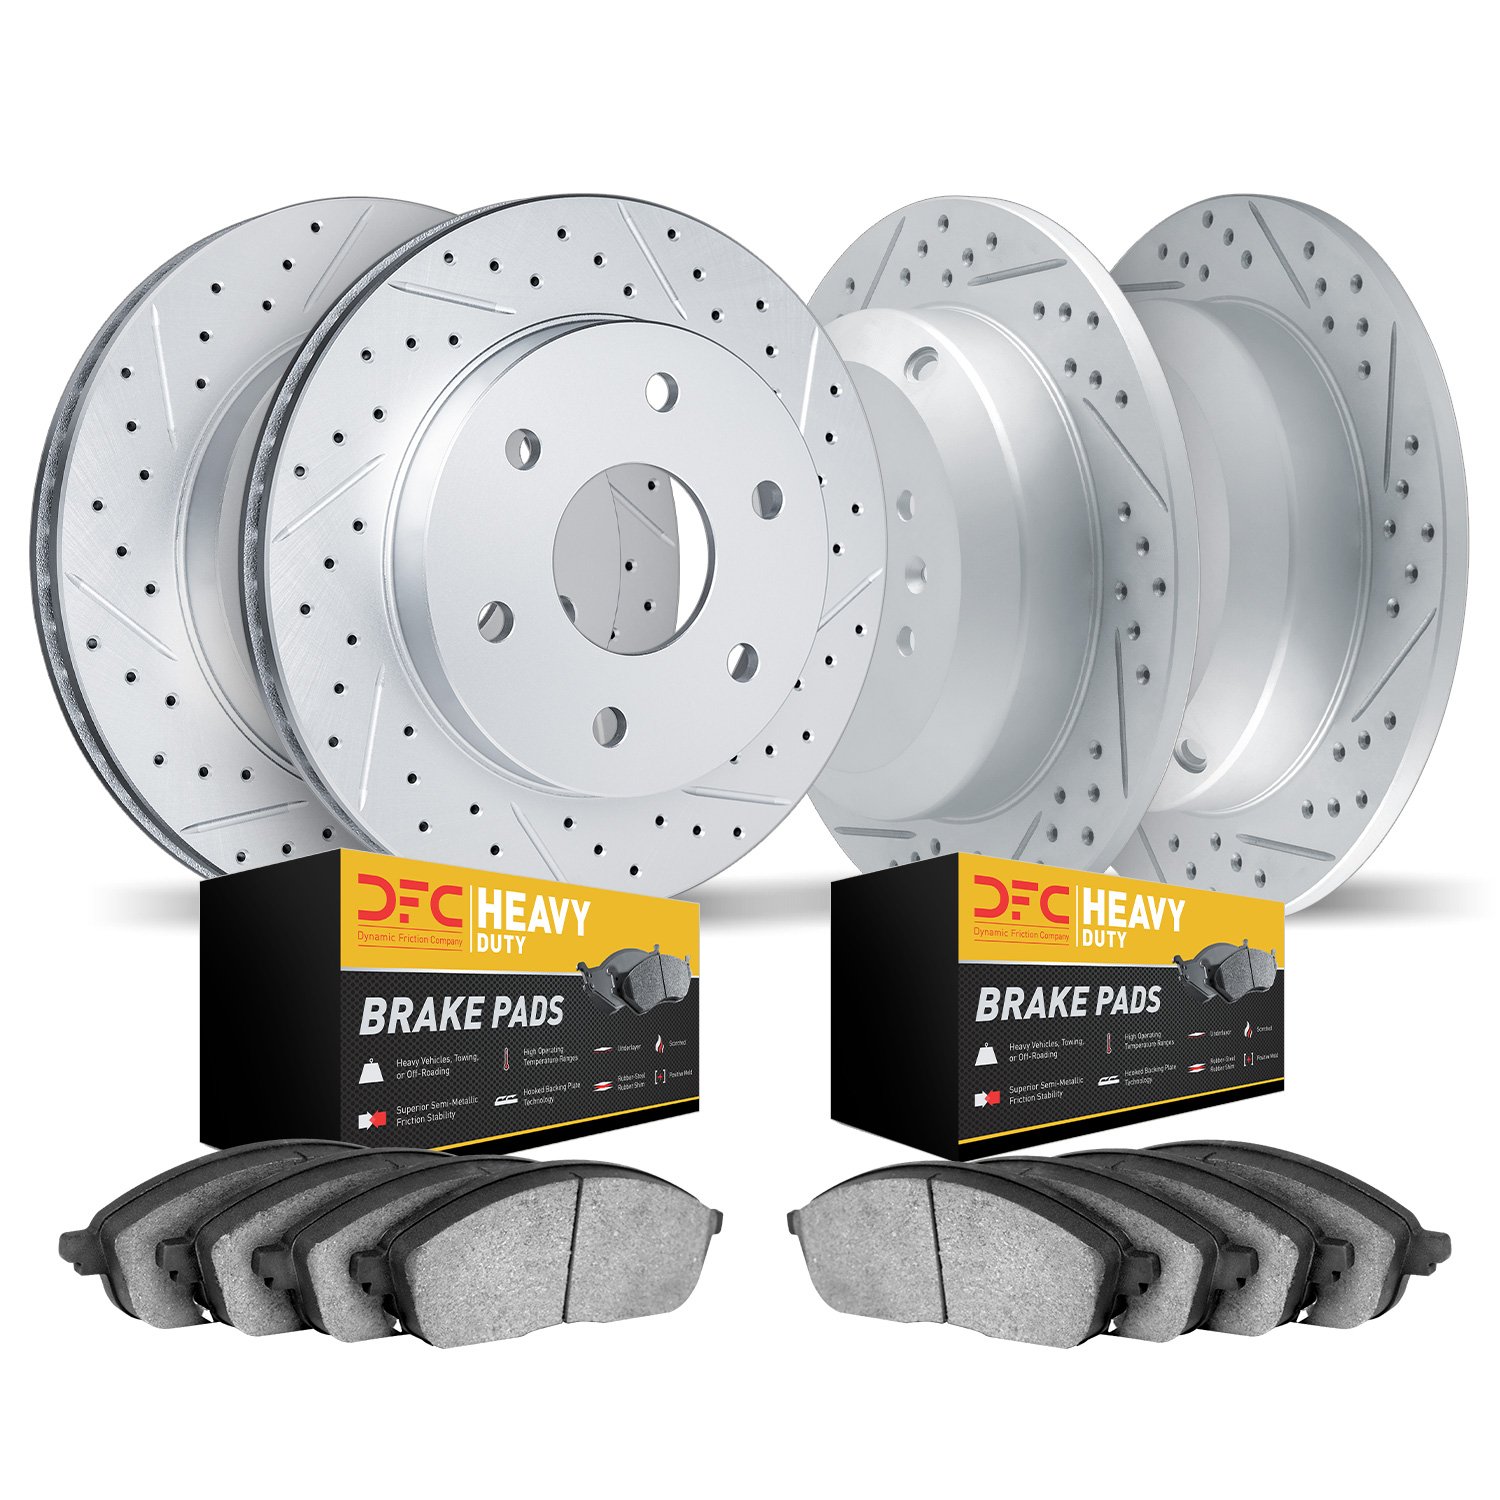 2204-40057 Geoperformance Drilled/Slotted Rotors w/Heavy-Duty Pads Kit, Fits Select Multiple Makes/Models, Position: Front and R